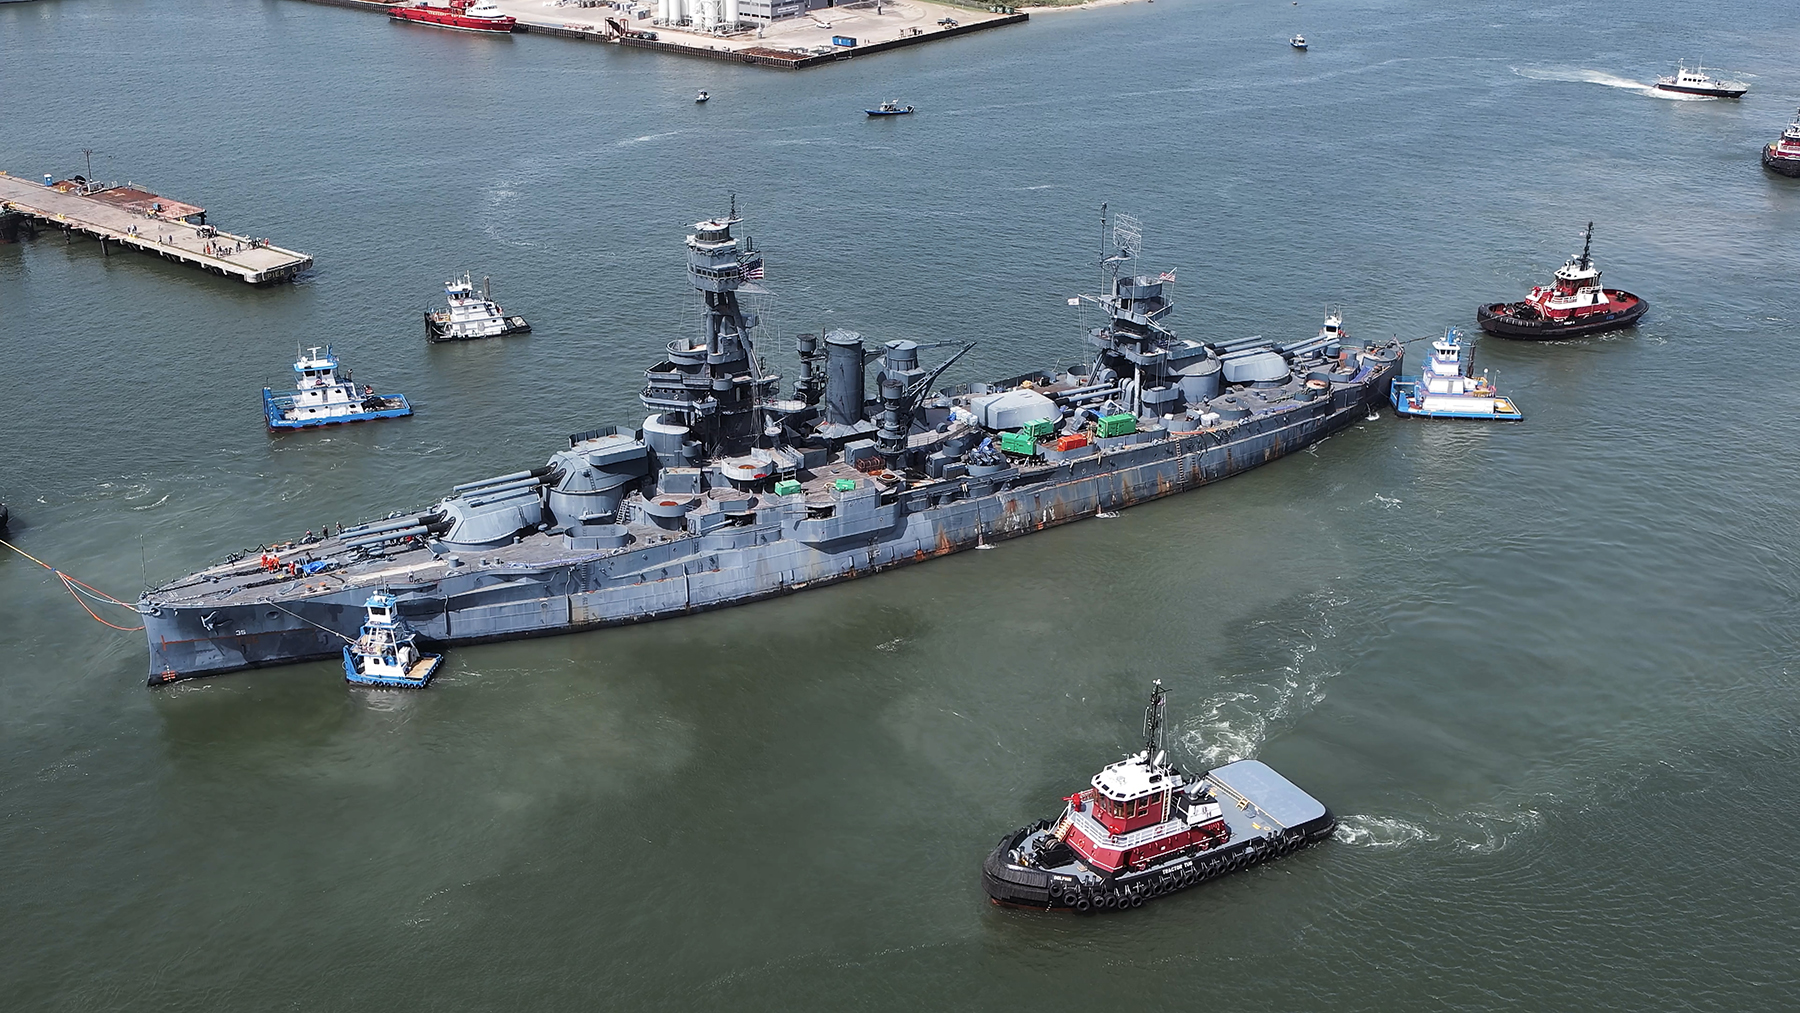 The trip to Galveston, Texas, was only the second time the battleship Texas has been moved since becoming a museum ship in 1948. (Image courtesy of Captiv Creative)